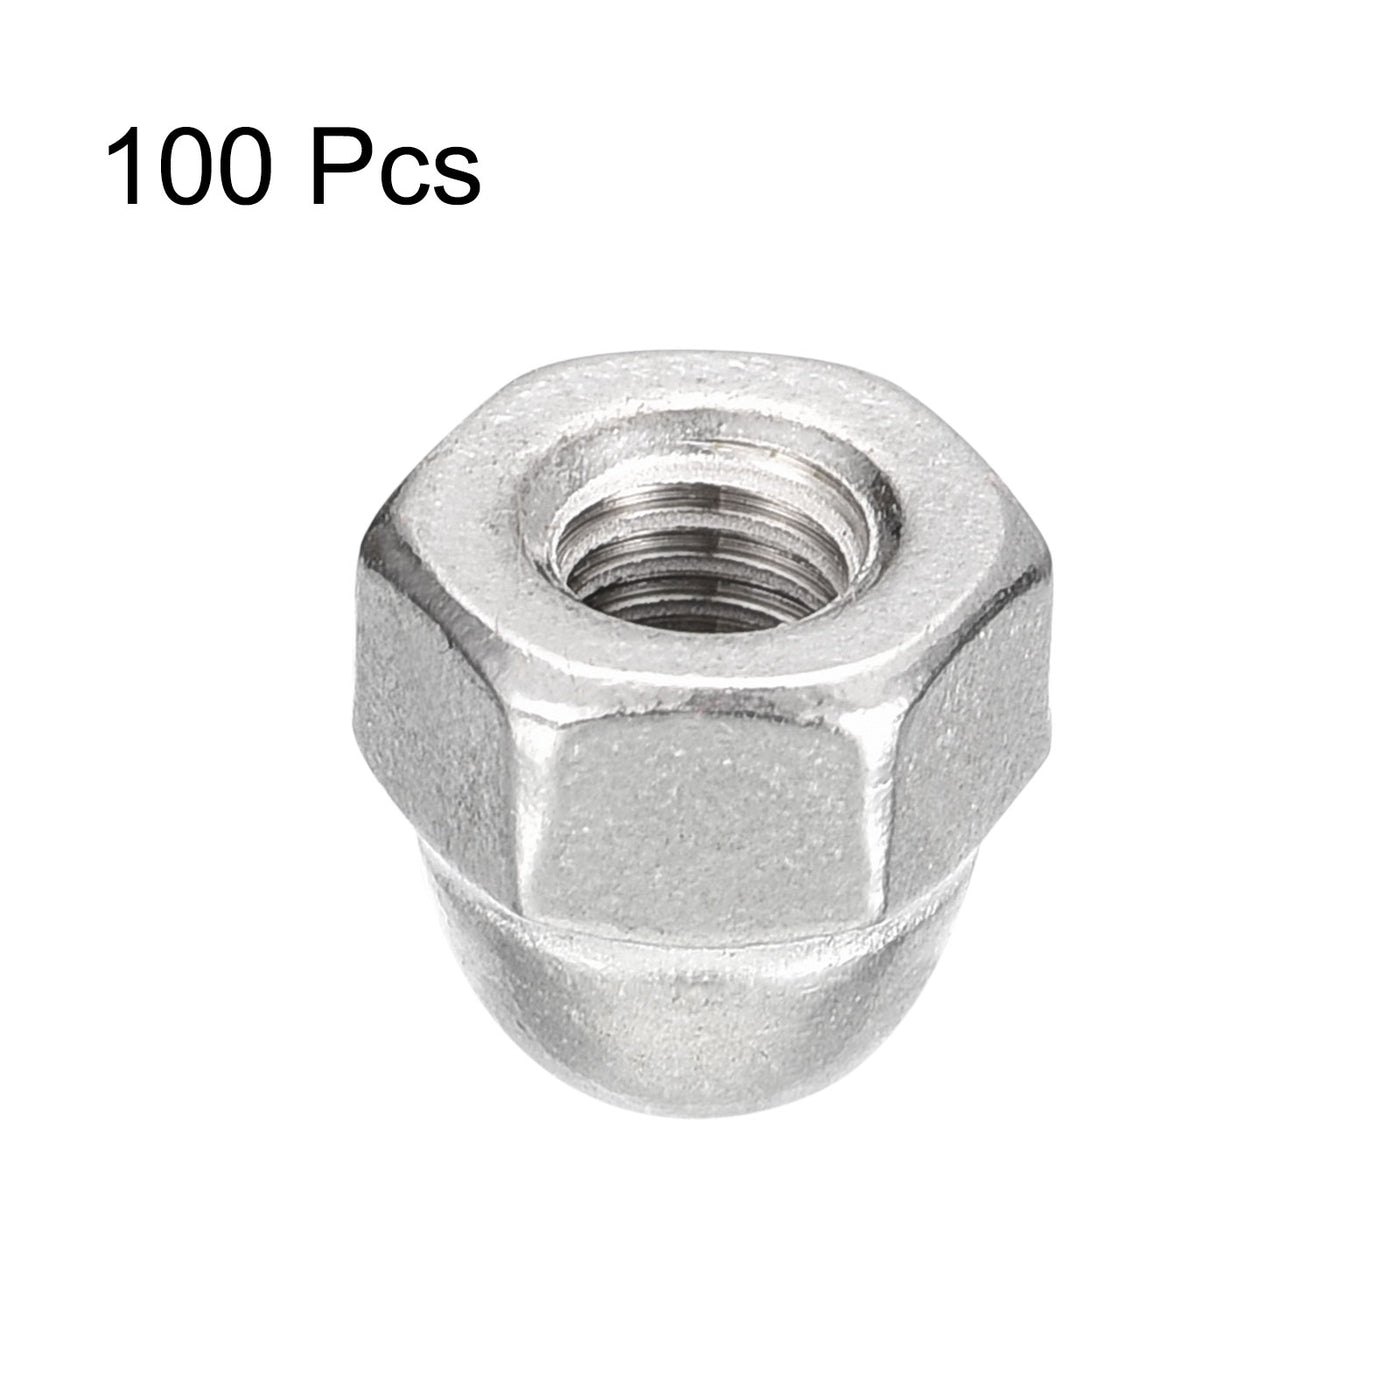 uxcell Uxcell #10-24 Acorn Cap Nuts,100pcs - 304 Stainless Steel Hardware Nuts, Acorn Hex Cap Dome Head Nuts for Fasteners (Silver)